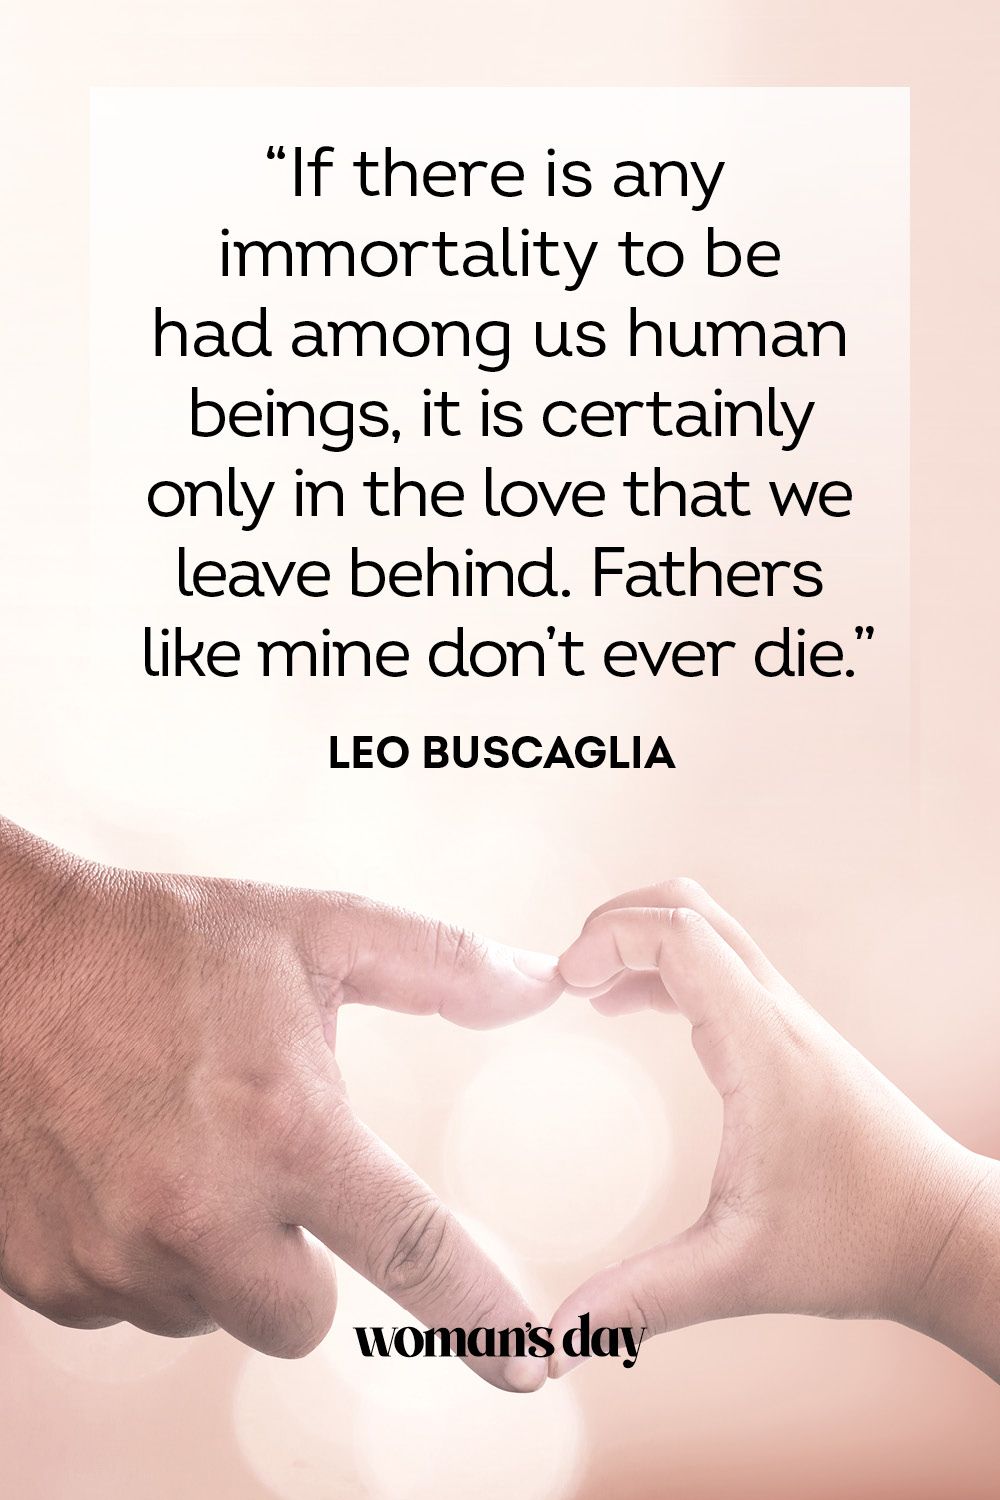 40 Comforting Loss Of Father Quotes - Quotes About Losing Your Father